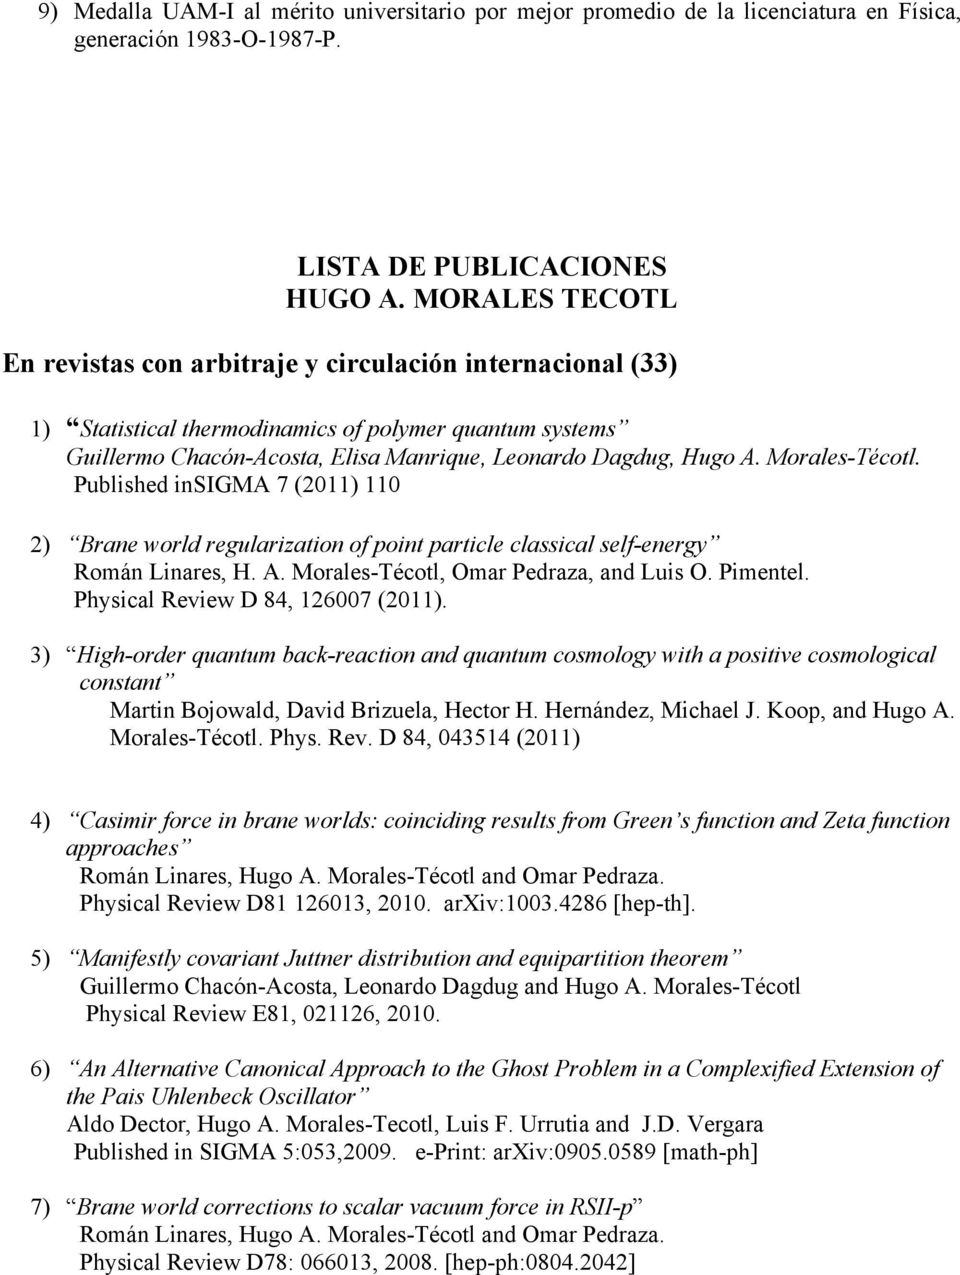 Morales-Técotl. Published insigma 7 (2011) 110 2) Brane world regularization of point particle classical self-energy Román Linares, H. A. Morales-Técotl, Omar Pedraza, and Luis O. Pimentel.